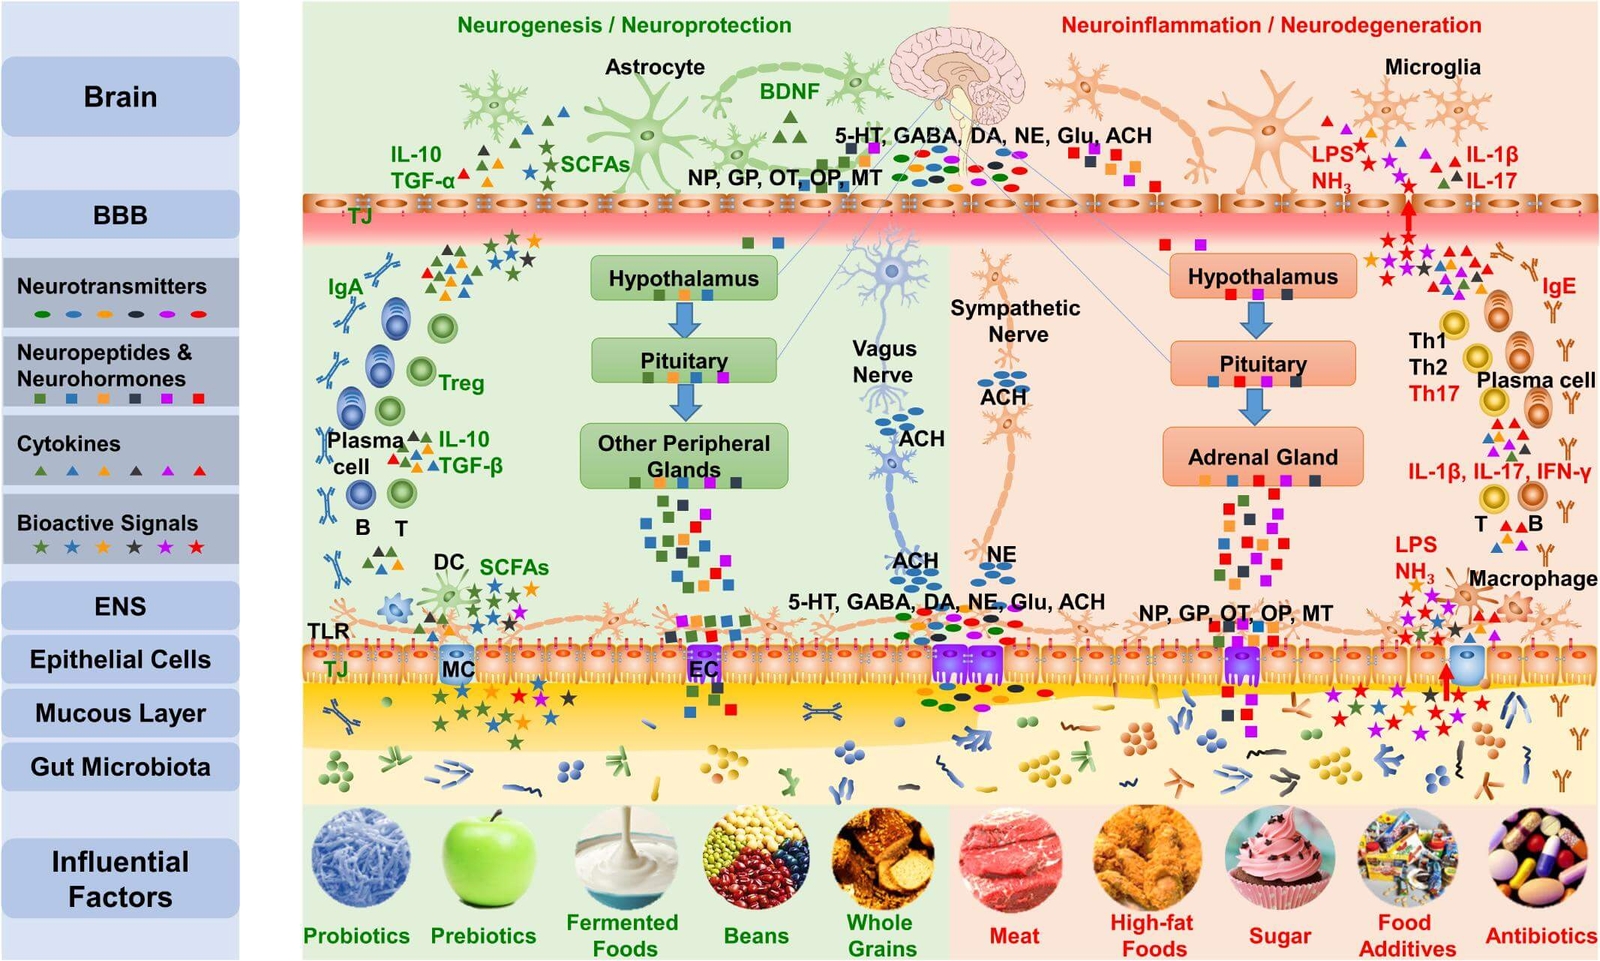 ADHD and the microbiome Fig 3